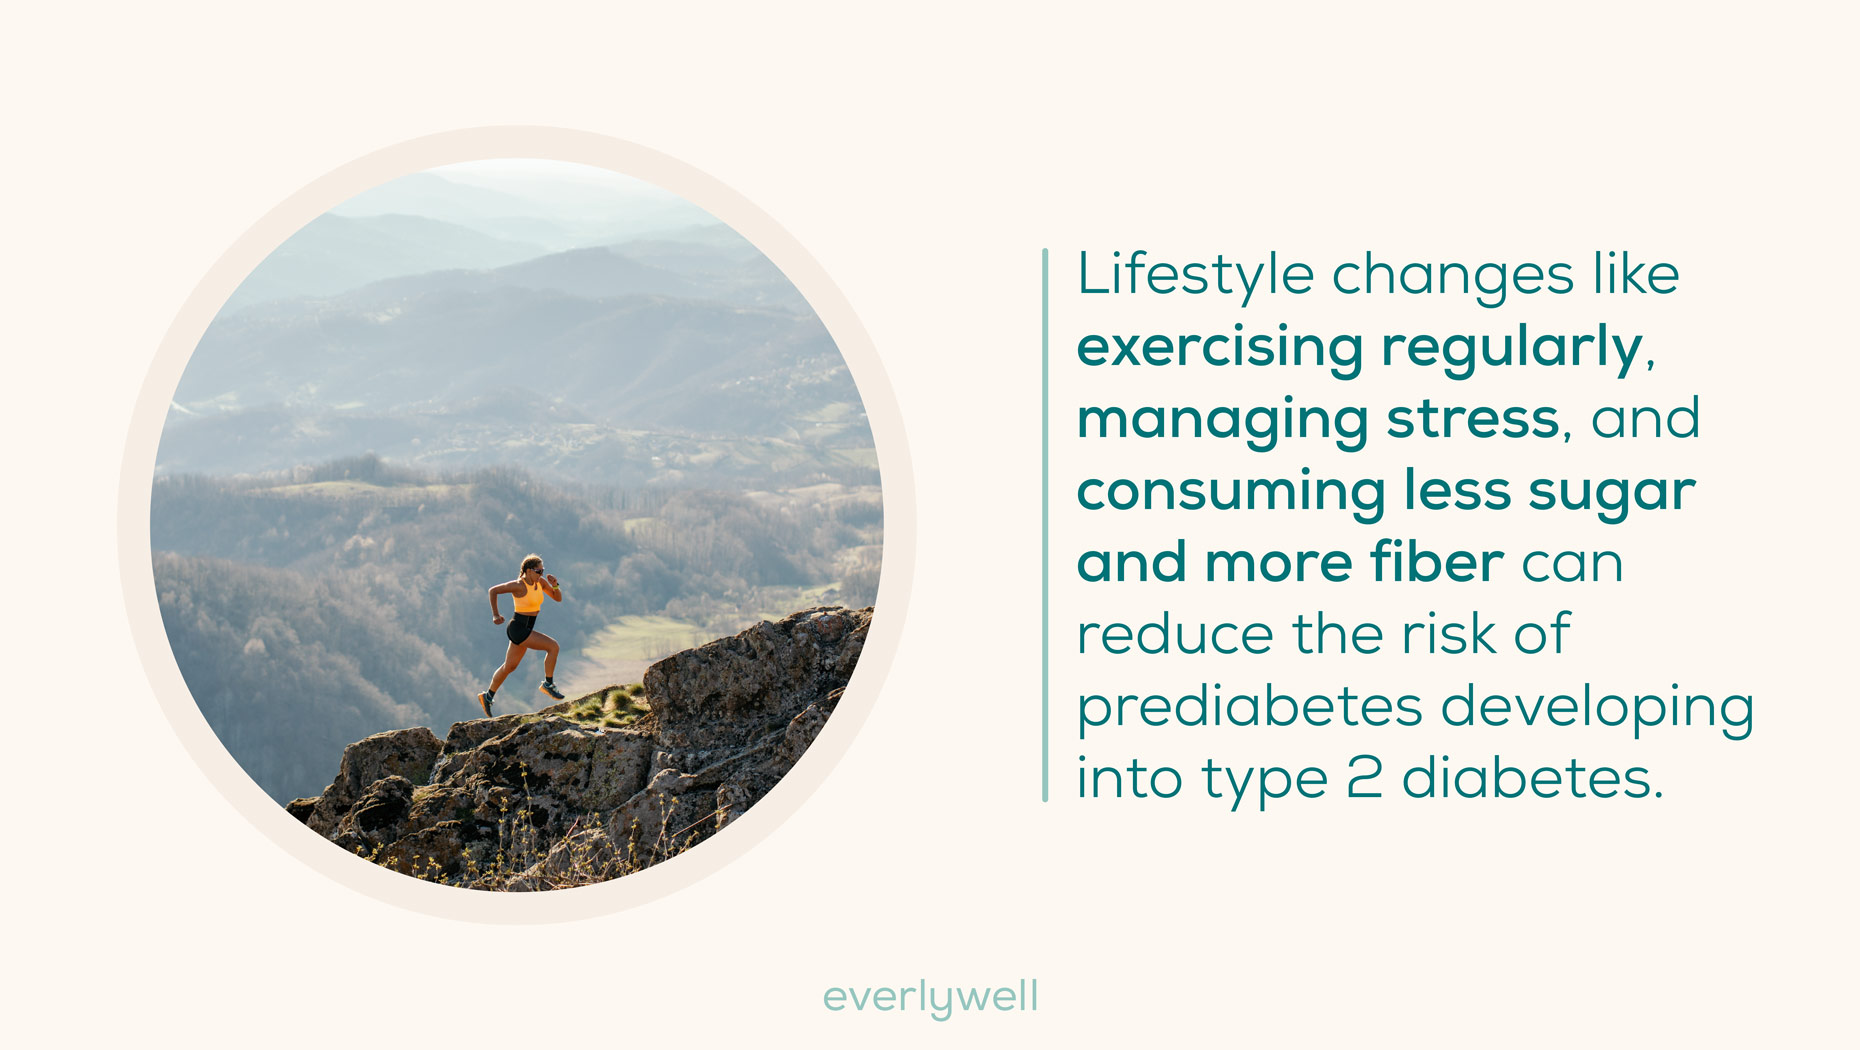 lifestyle-changes-can-reduce-risk-of-prediabetes